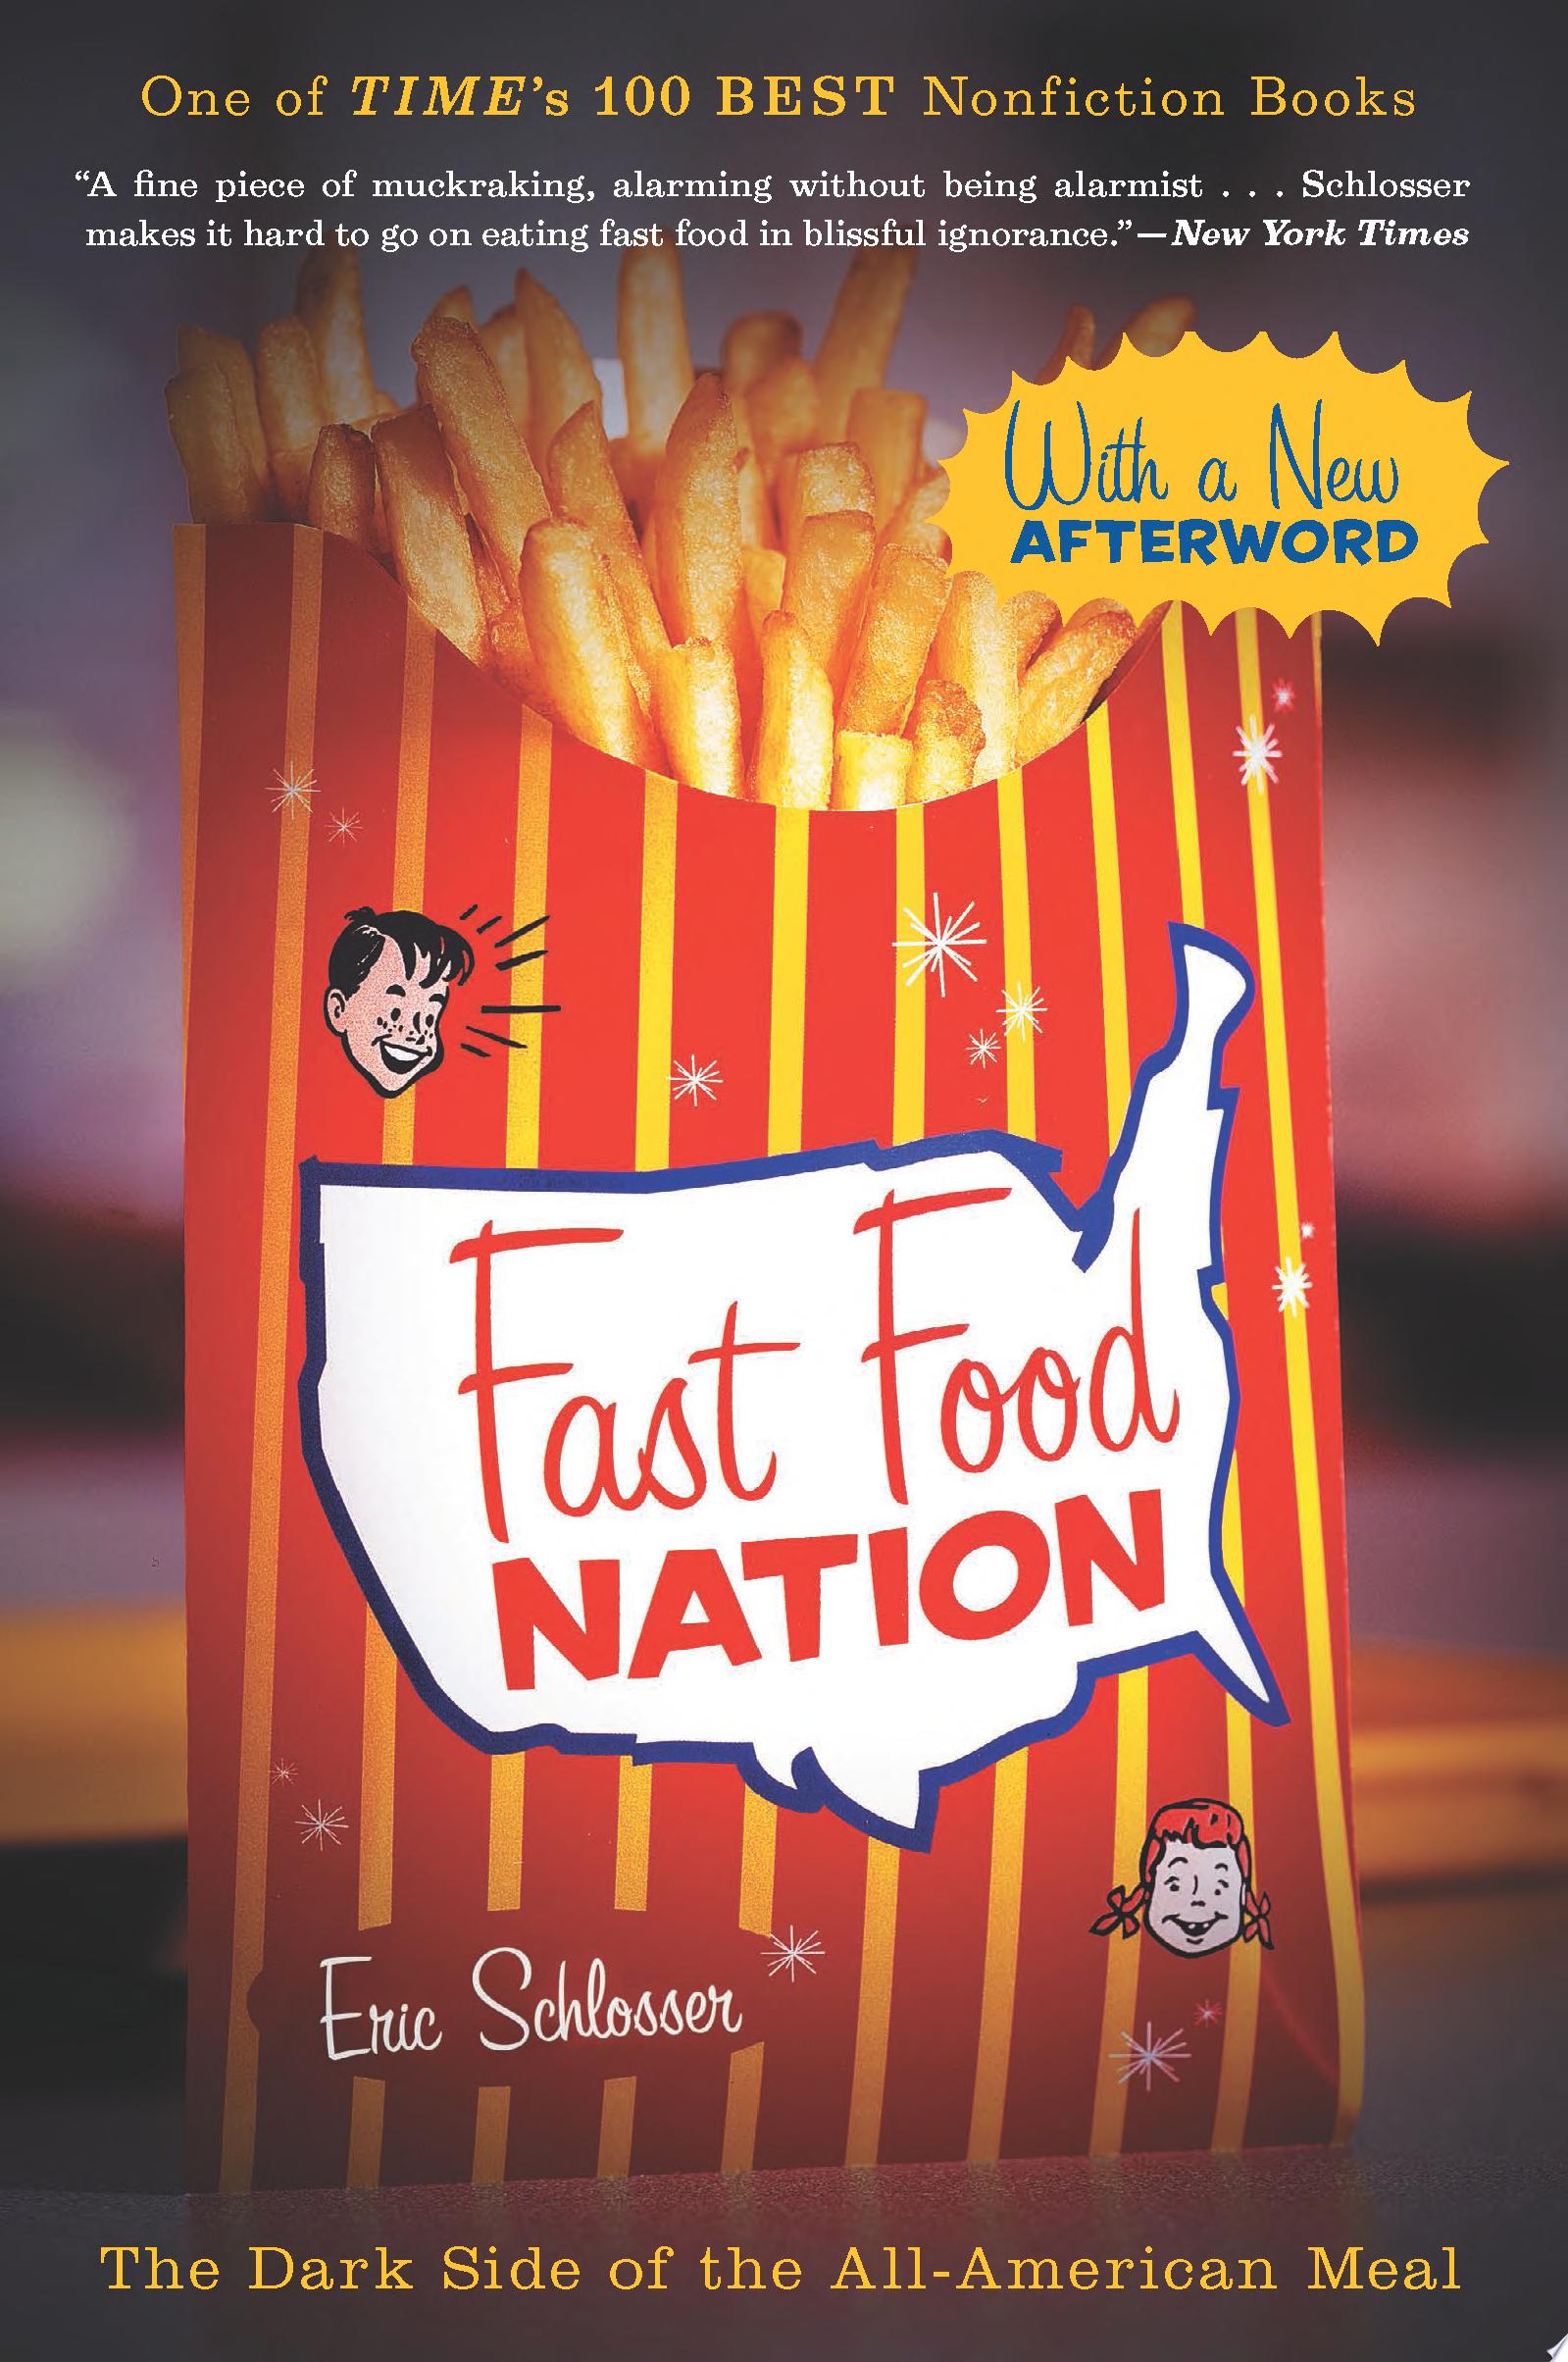 Image for "Fast Food Nation"